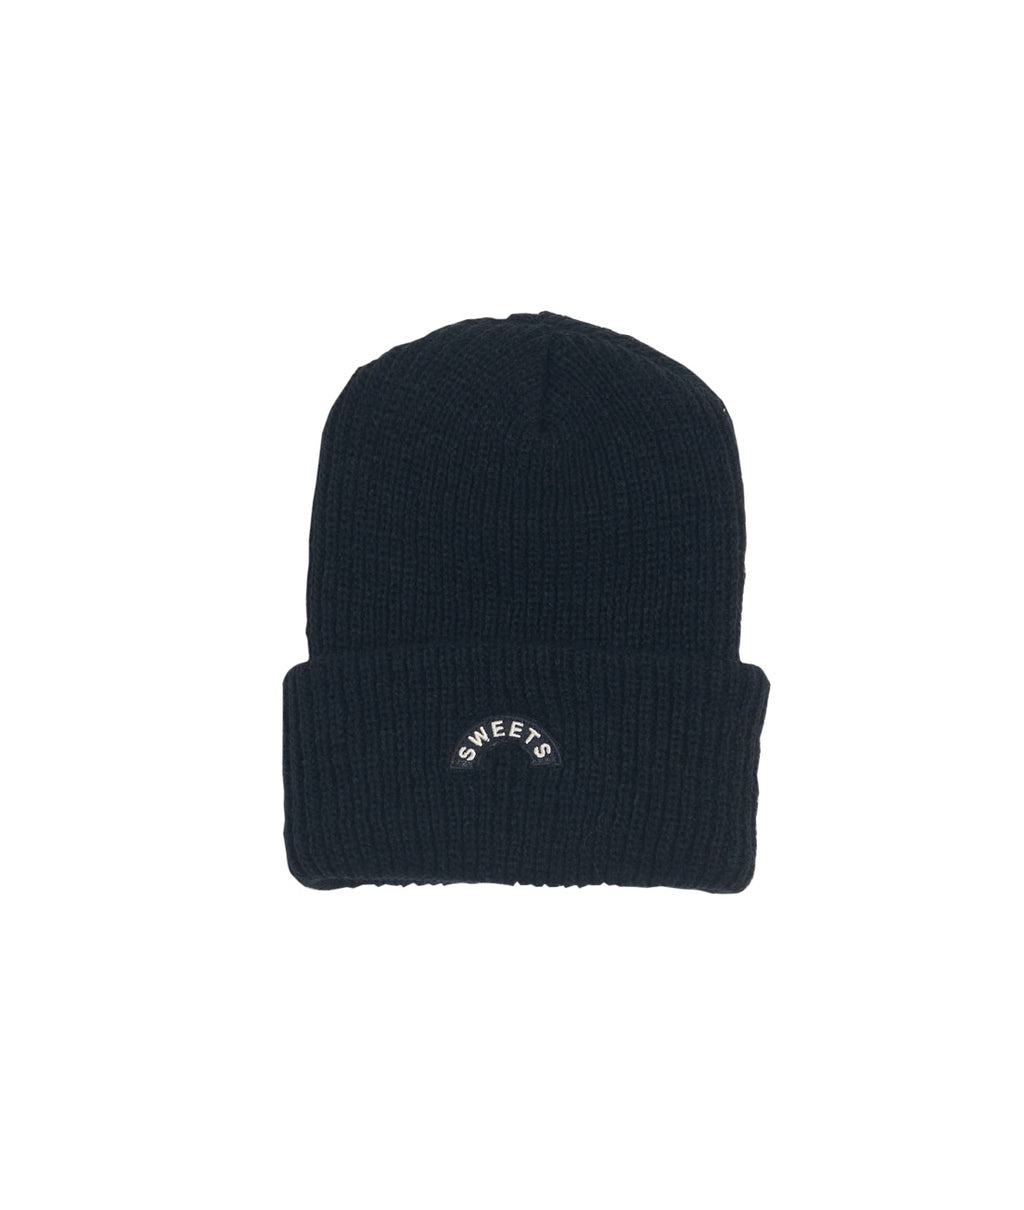 BEANIE ALL SWEETS ANGELES LOS - RIGHTS KNIT BLACK 2021 SWEETS RESERVED –